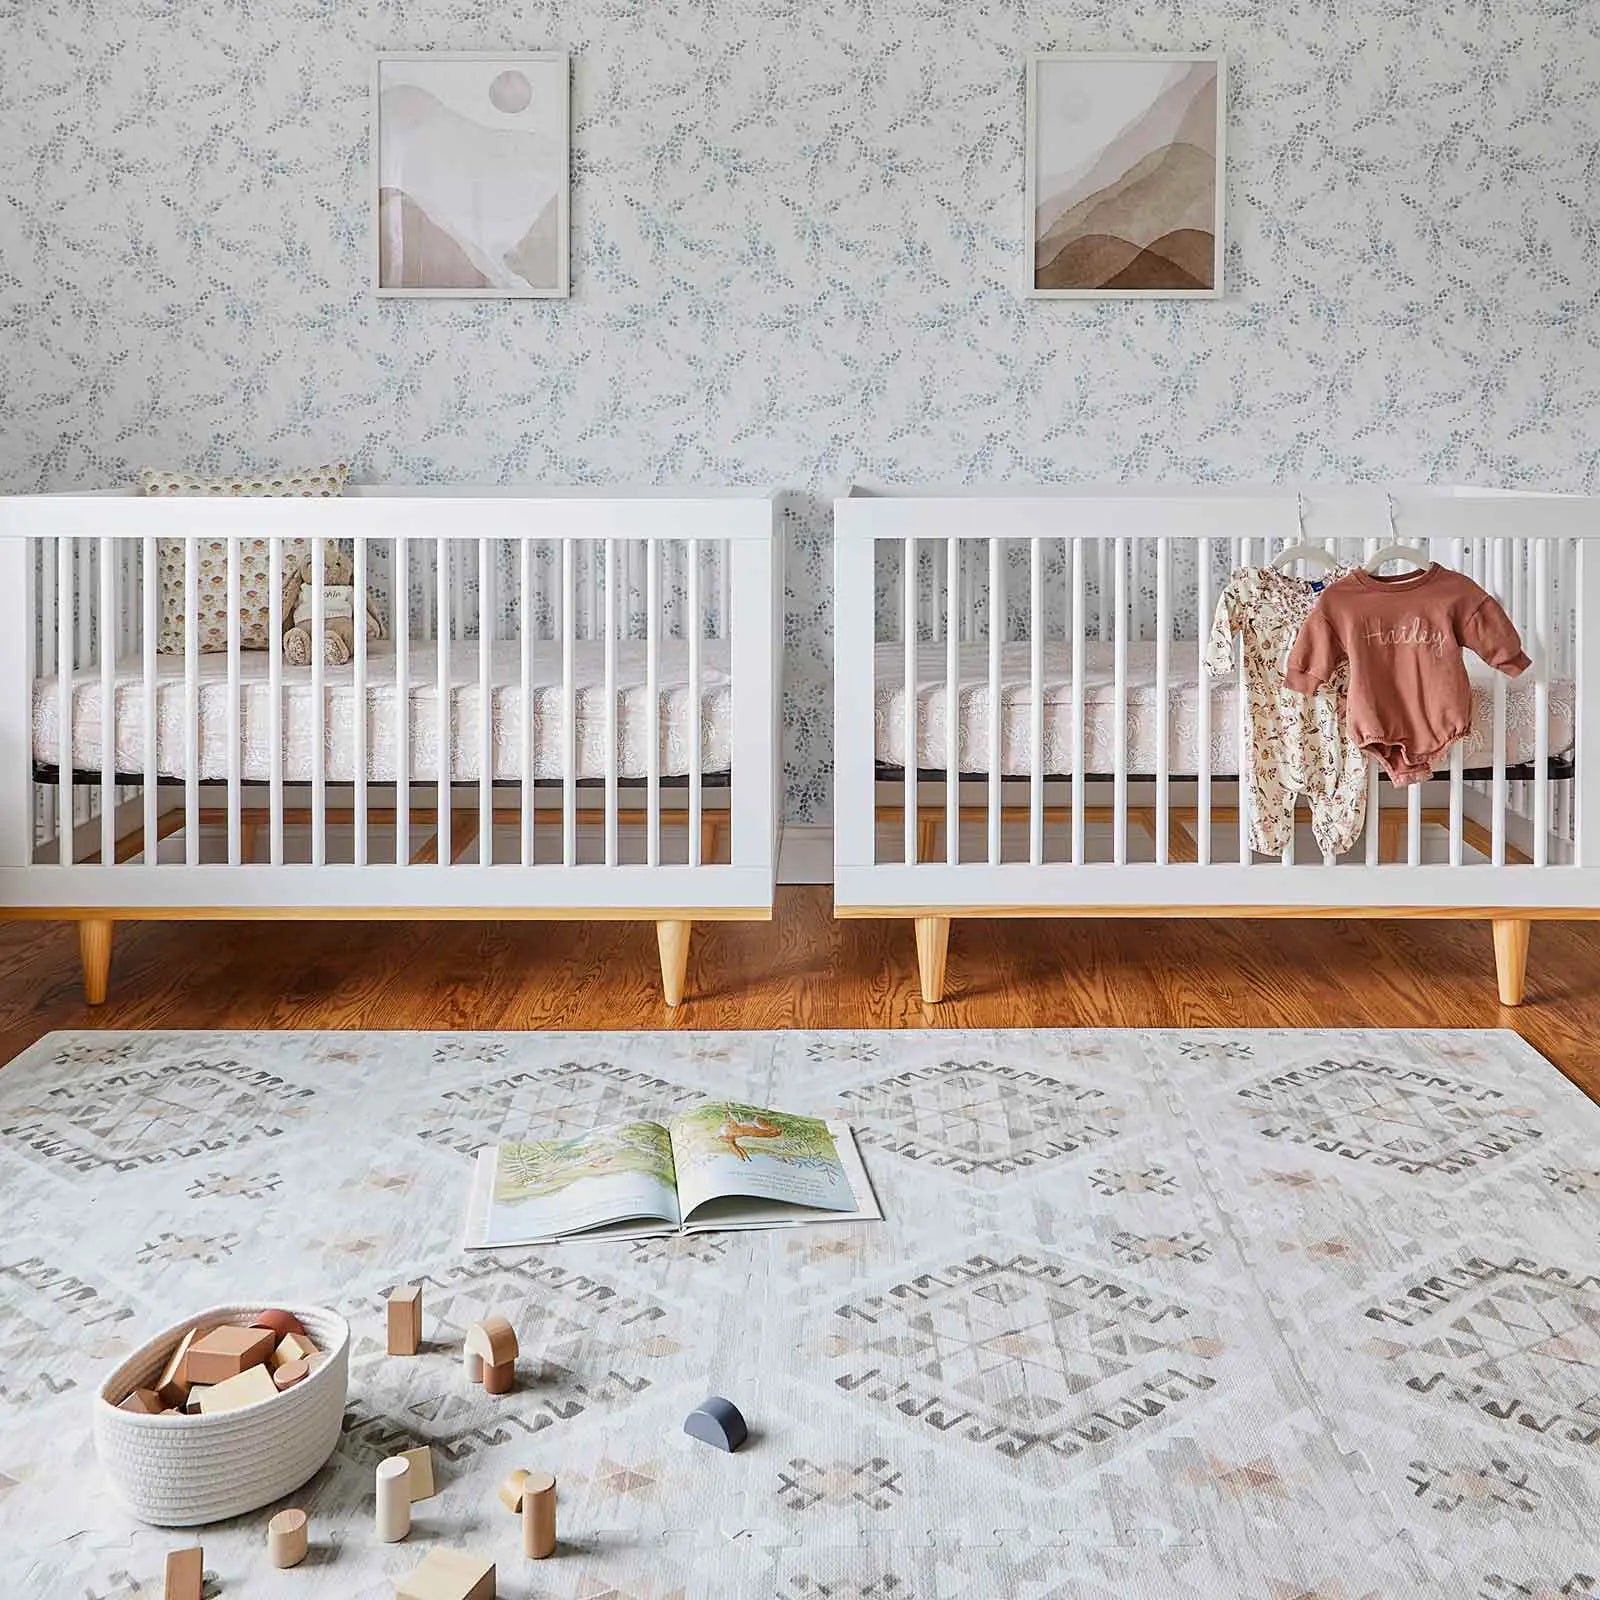 Nalla Basalt grey and sage green boho print play mat shown in nursery with 2 cribs with a book and blocks on the mat